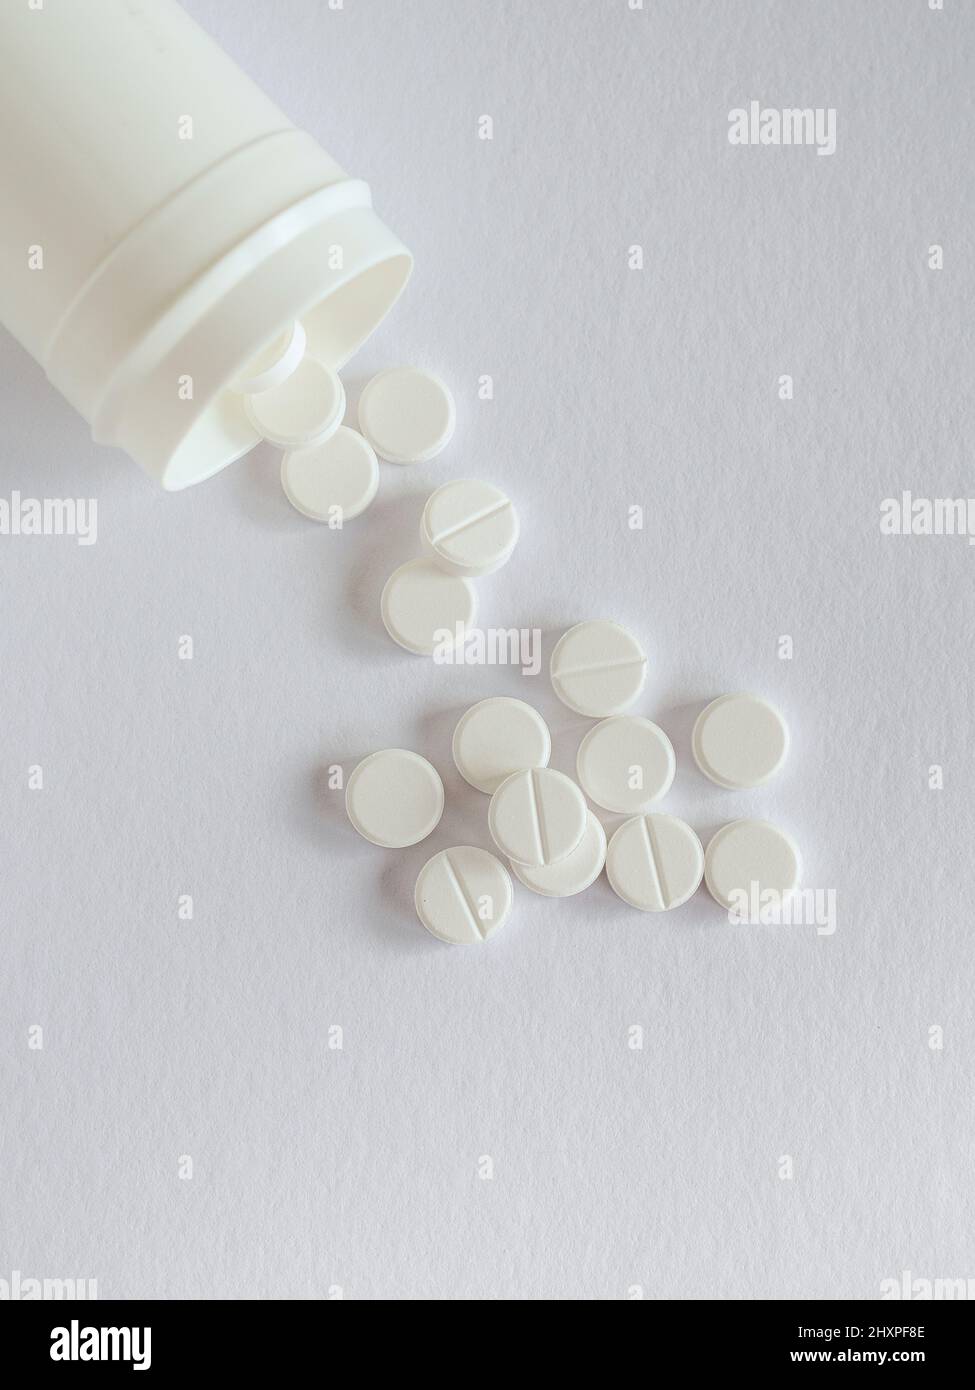 Dose with white pills on white background. Overhead view with copy space Stock Photo